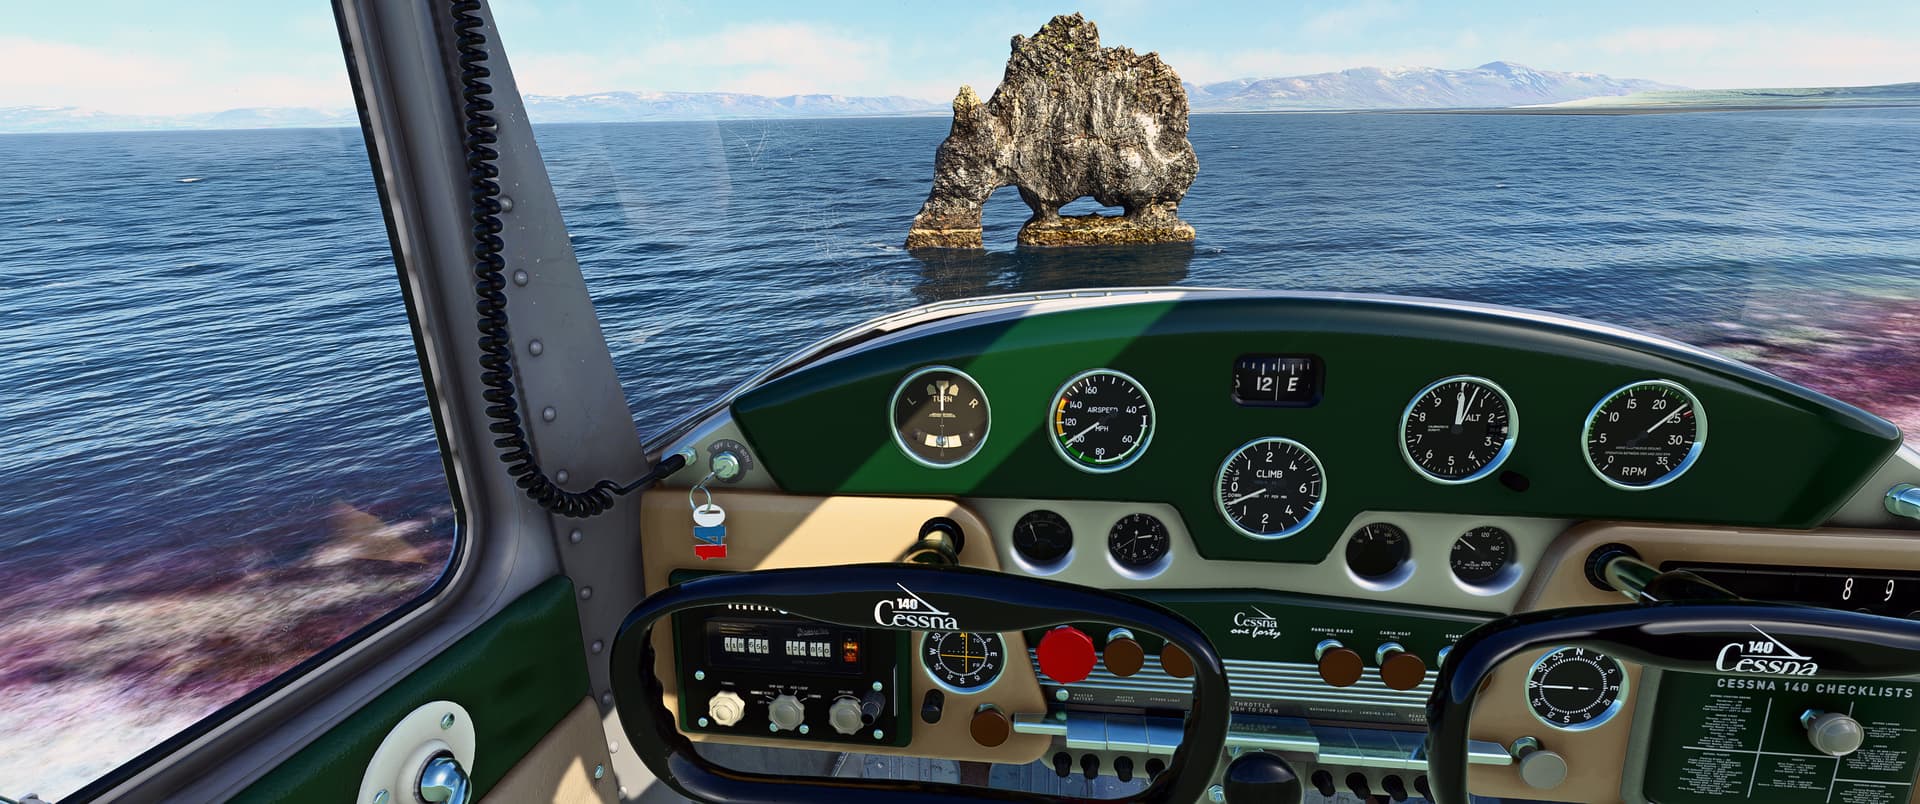 [OFFICIAL] Weekly Dev Update Screenshot Challenge: My Cessna! - #36 by ...